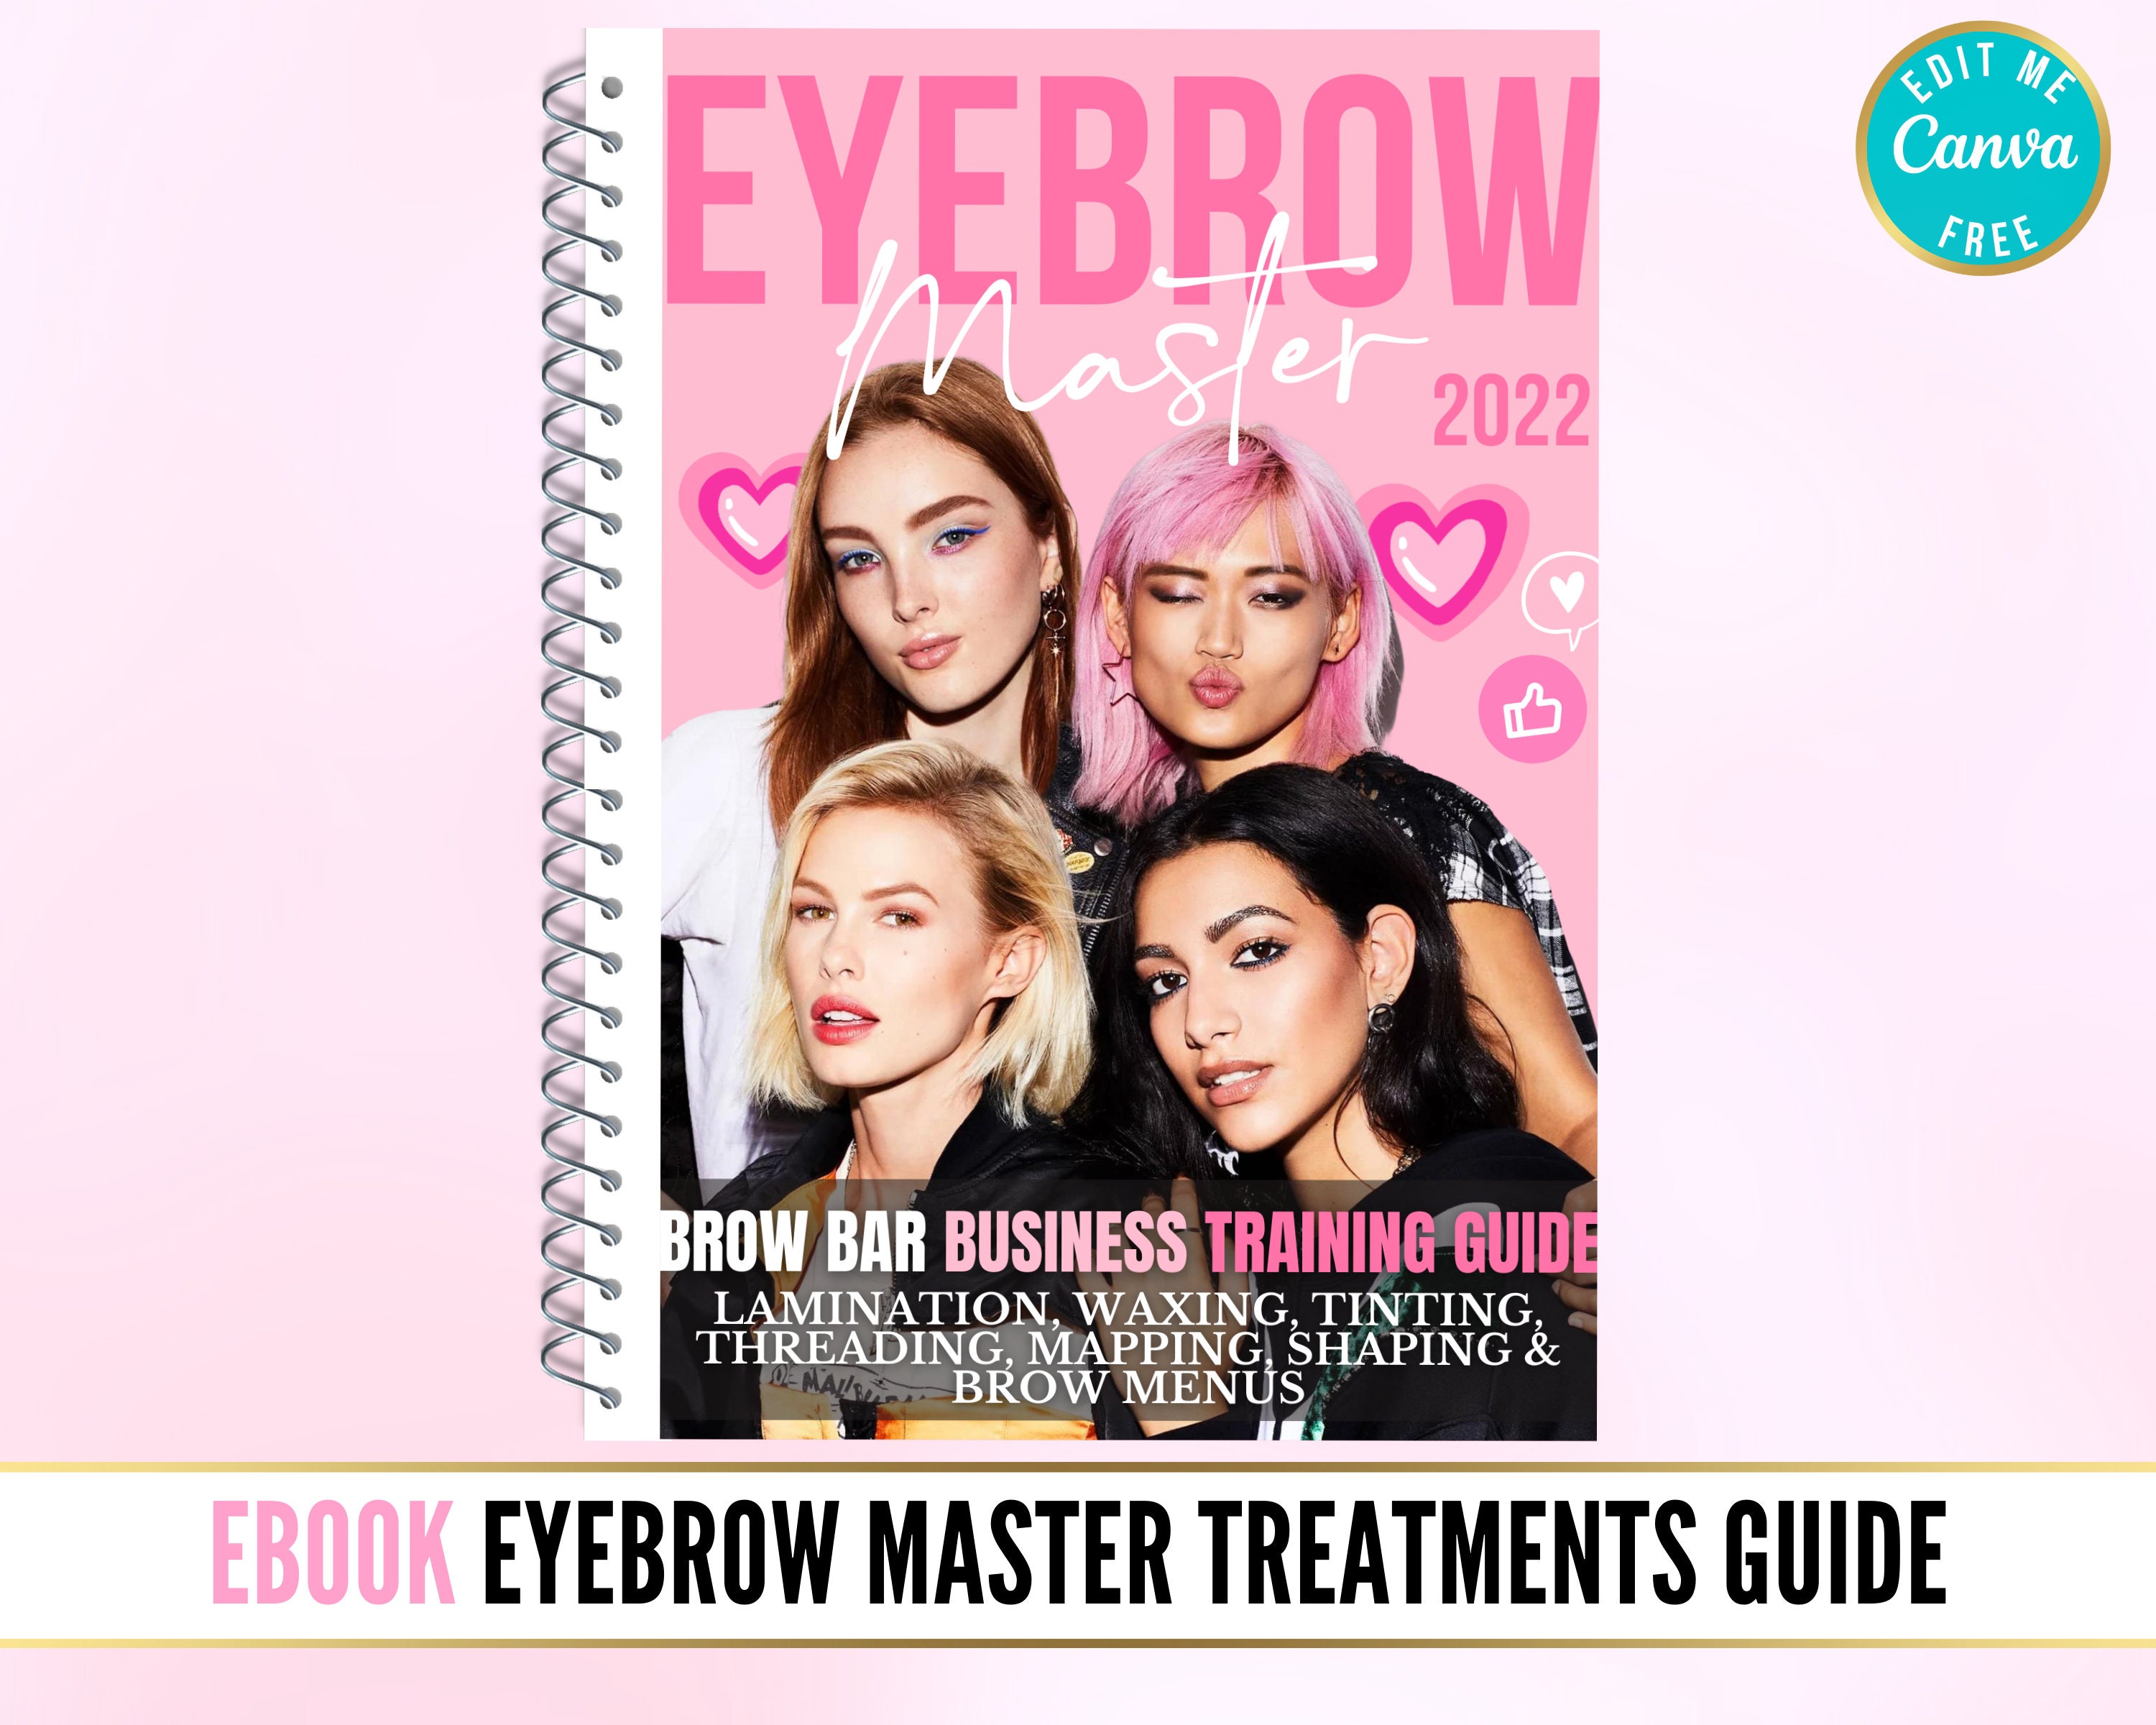 Eyebrow Waxing Vs. Threading, Complete Guide for Beginners